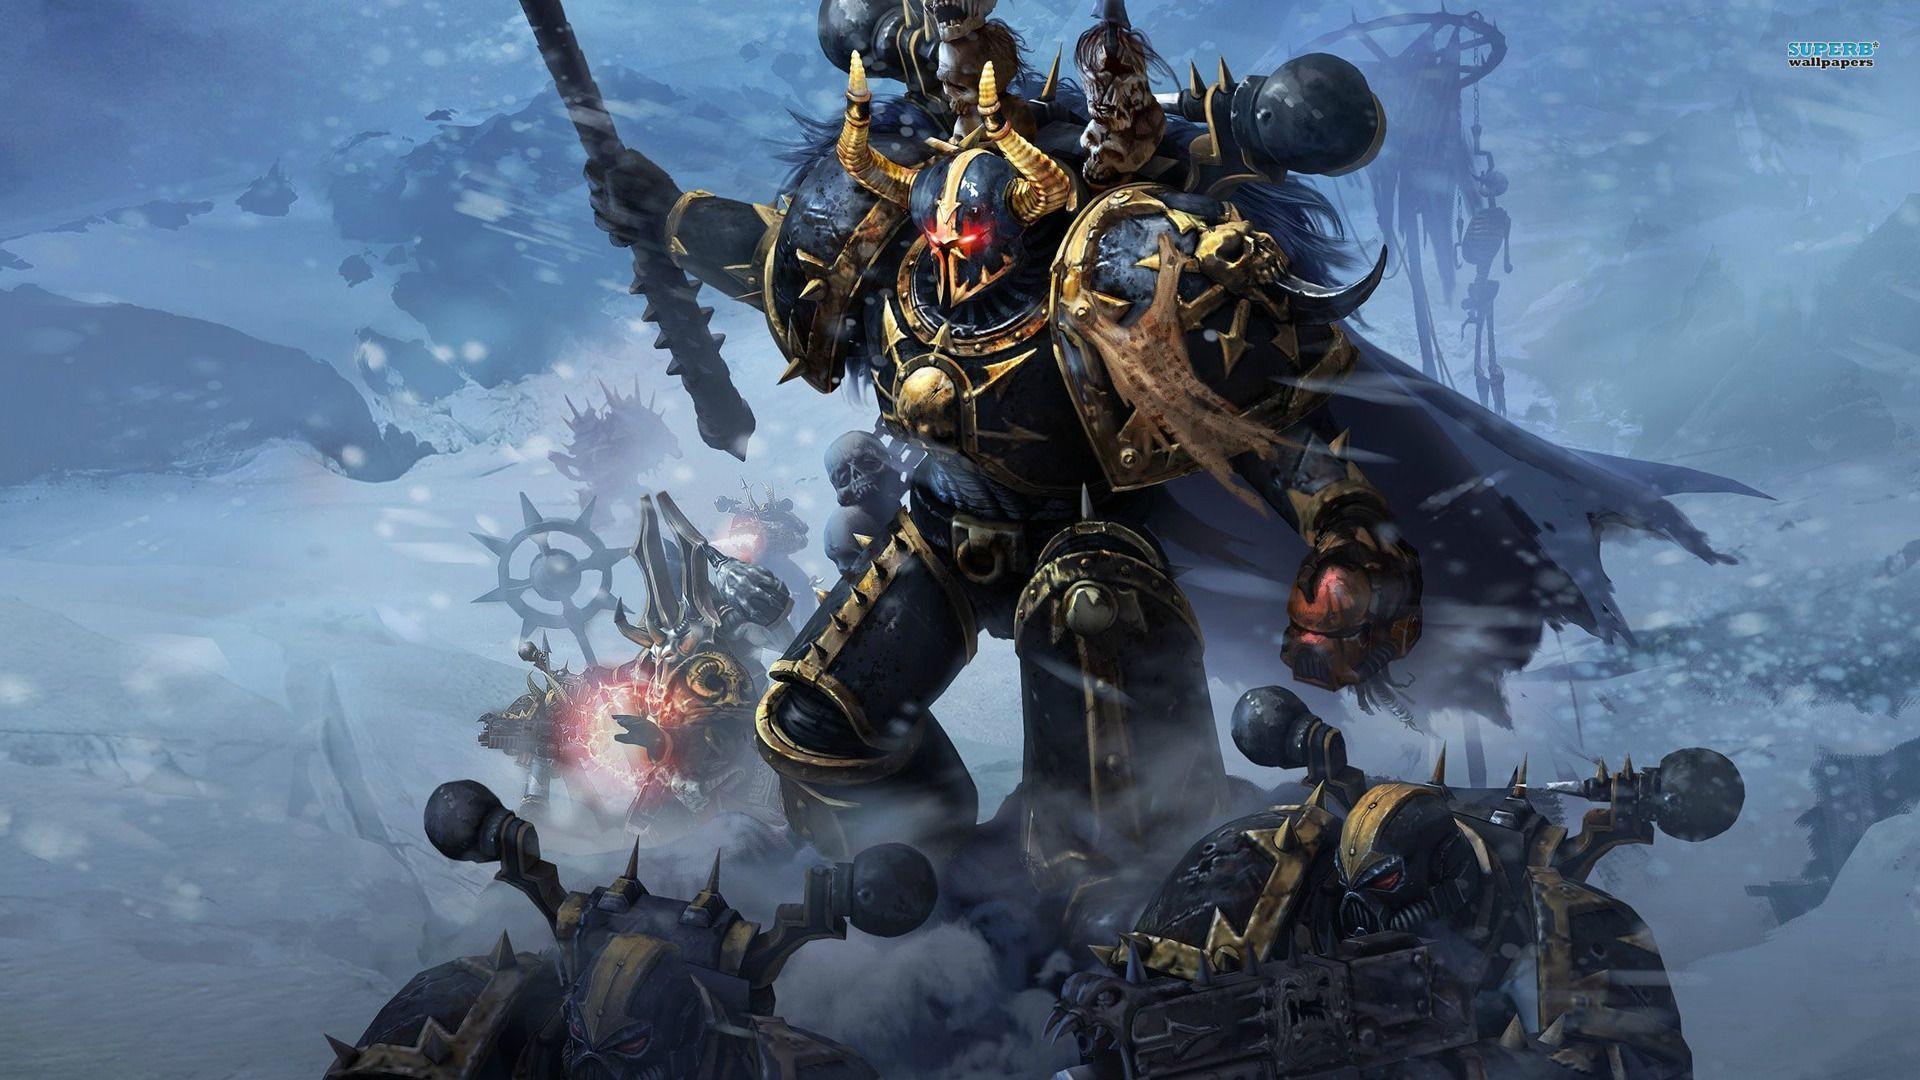 Gallery For Gt Space Marine Wallpaper